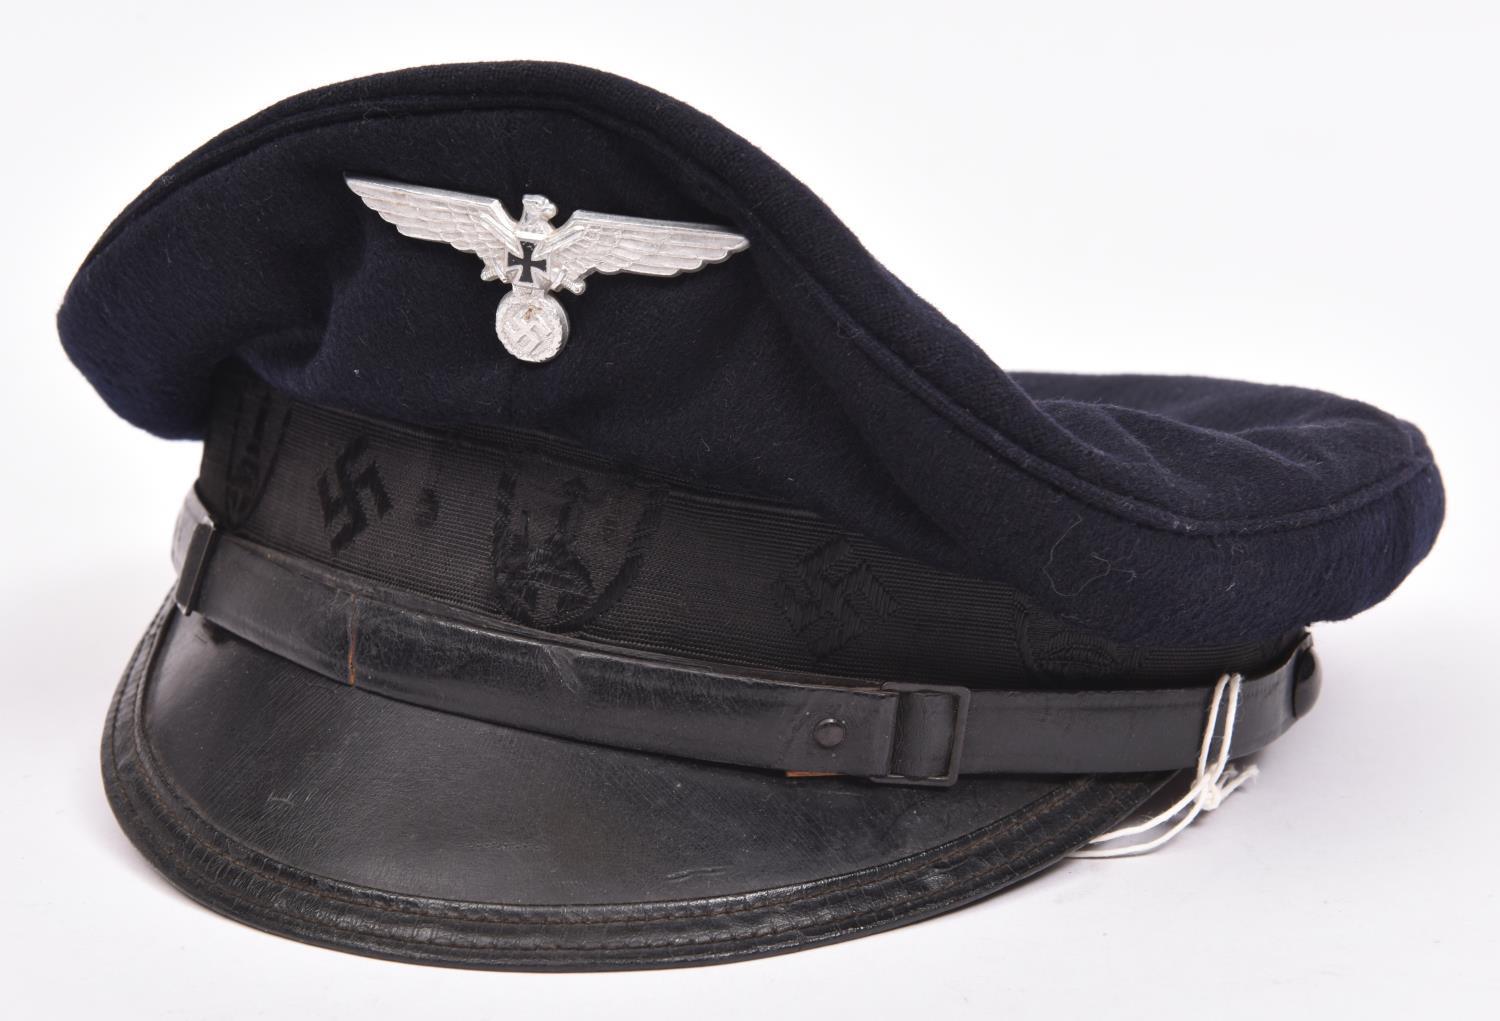 A Third Reich Kuffhauserbund peaked cap, with aluminium badge, fibre peak, embroidered band, leather